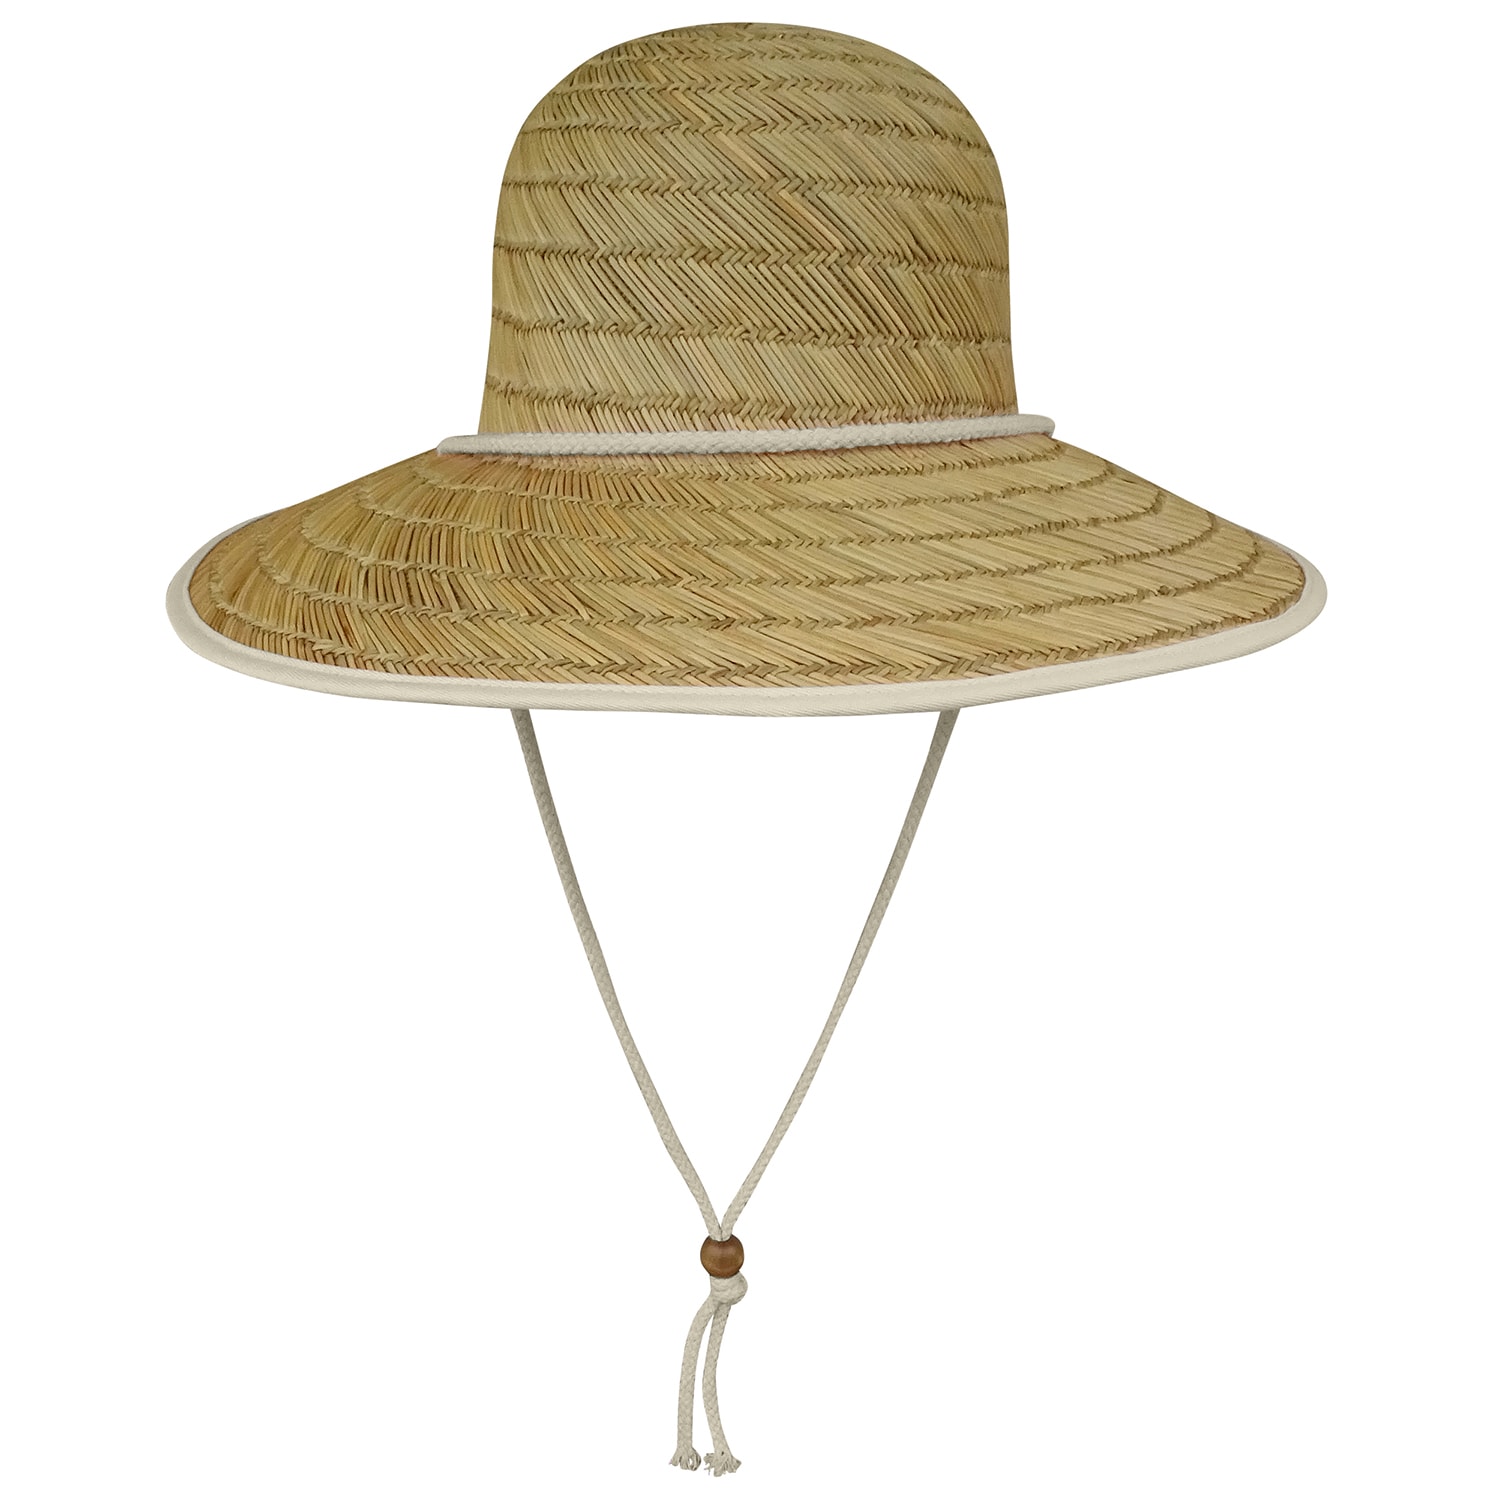 Infinity Brands Women's Natural Straw Wide-brim Hat (Large/x-large